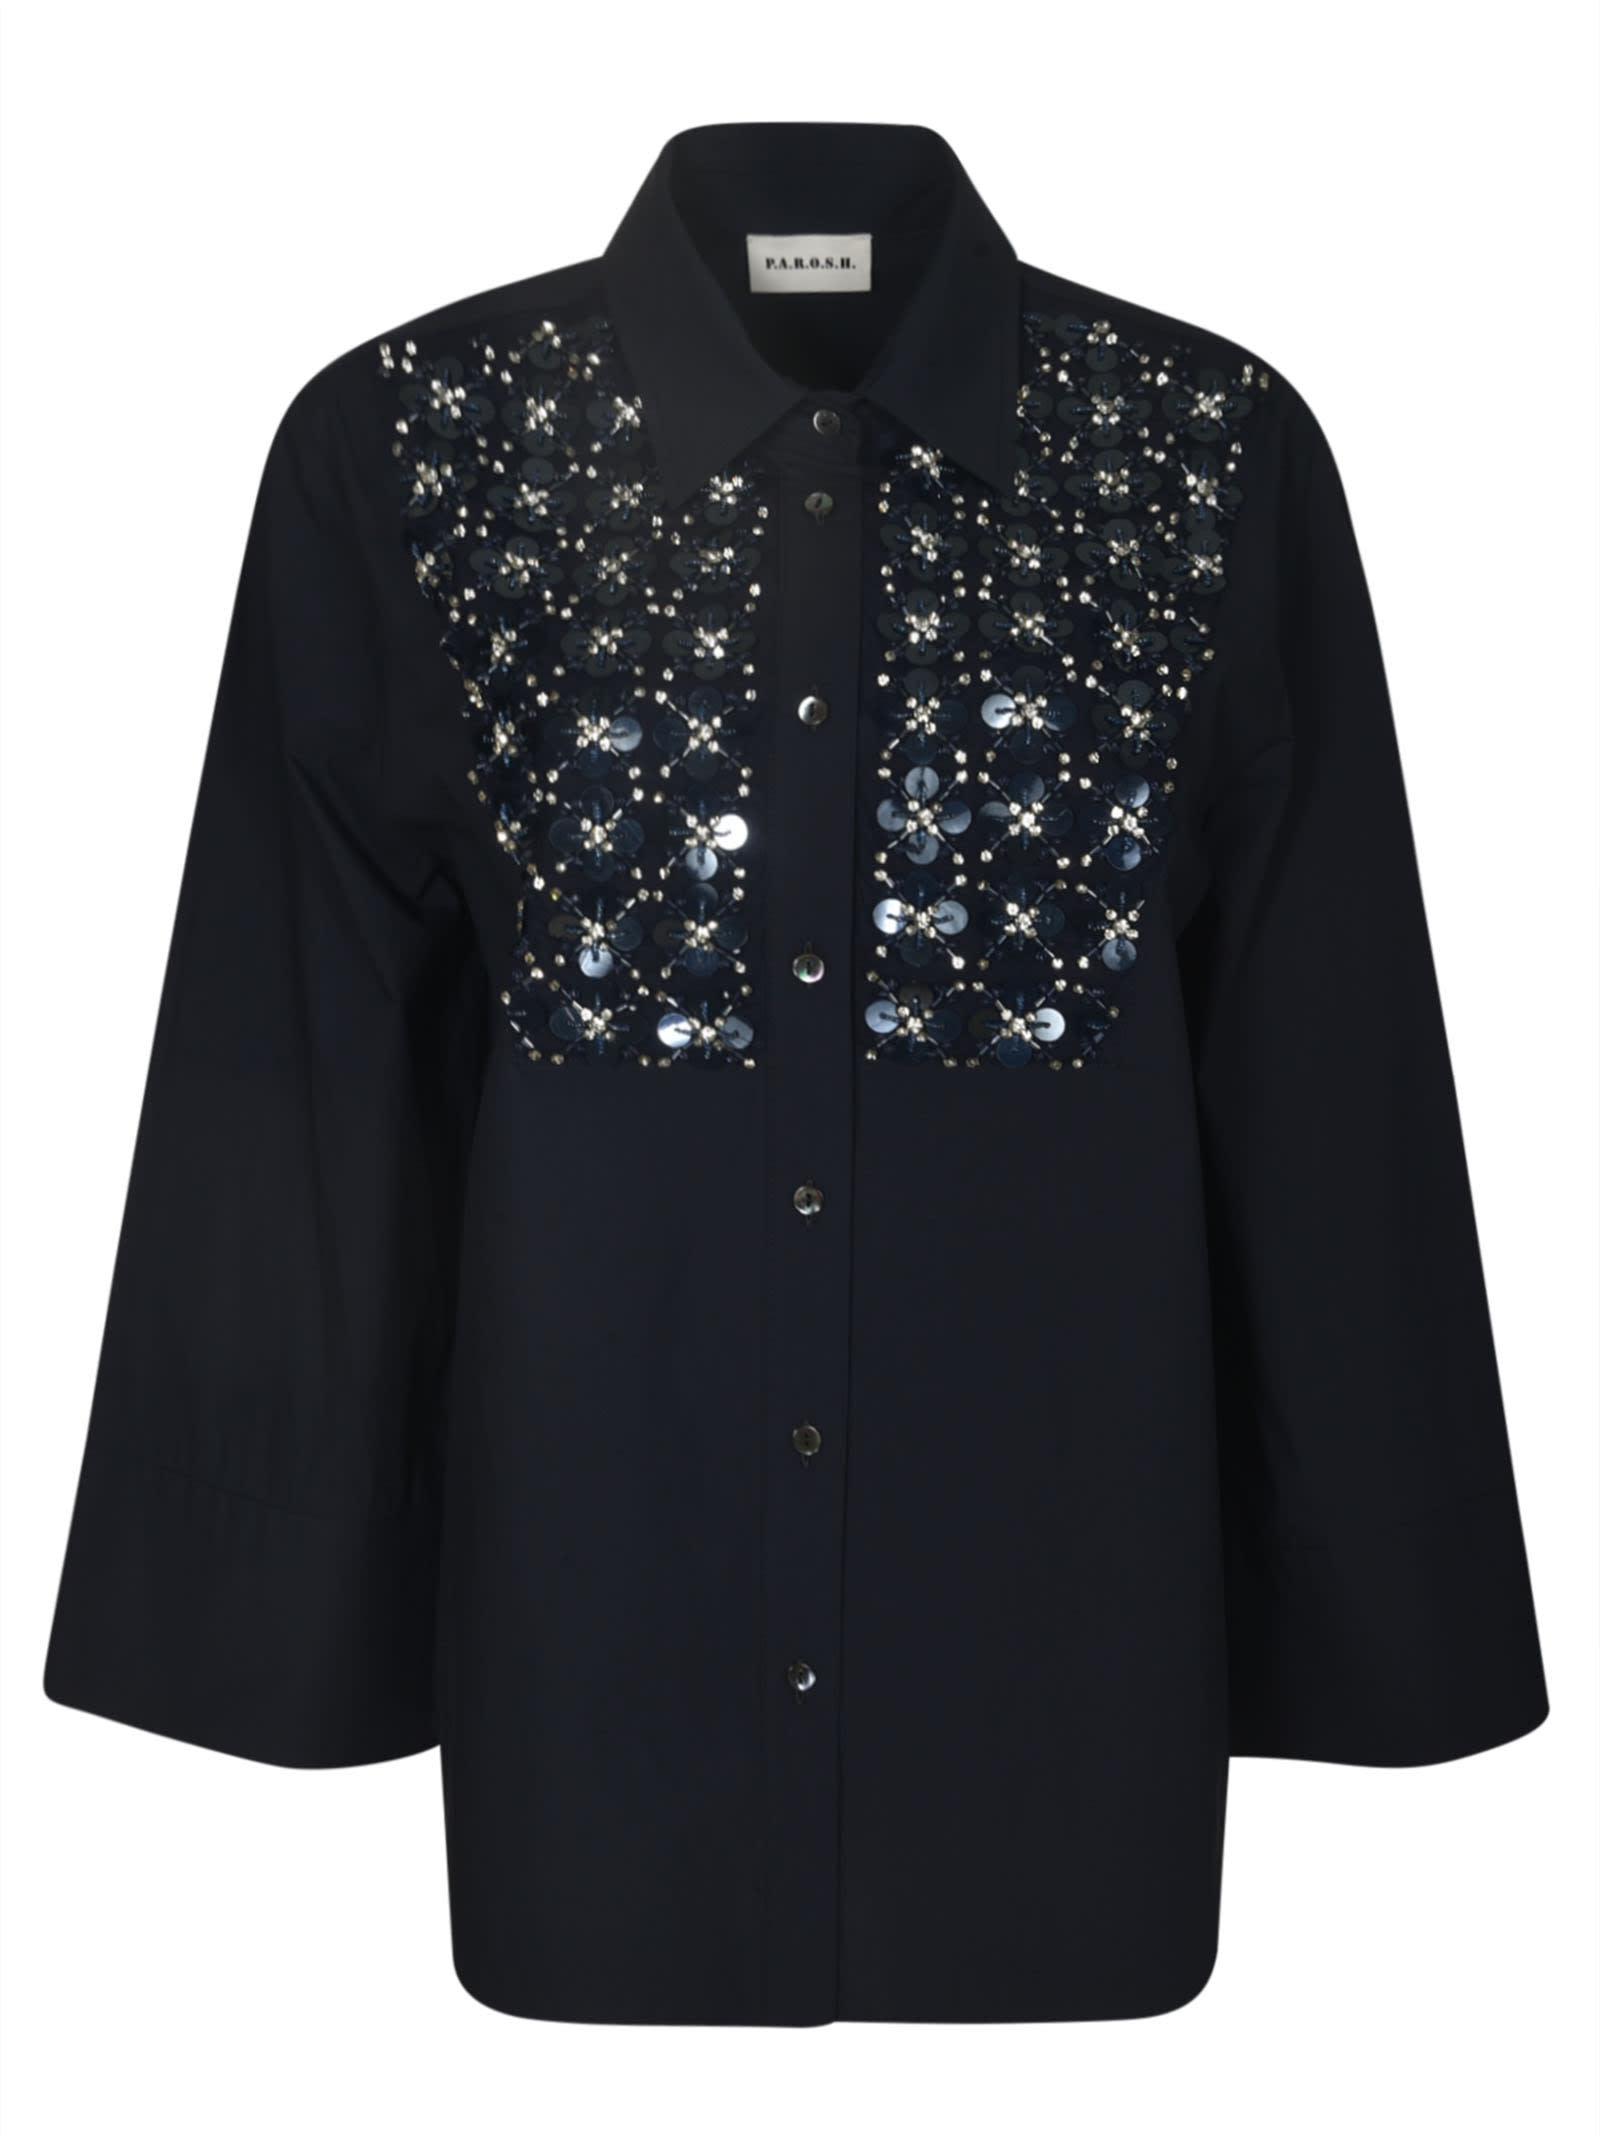 P.a.r.o.s.h Embellished Shirt In Blue